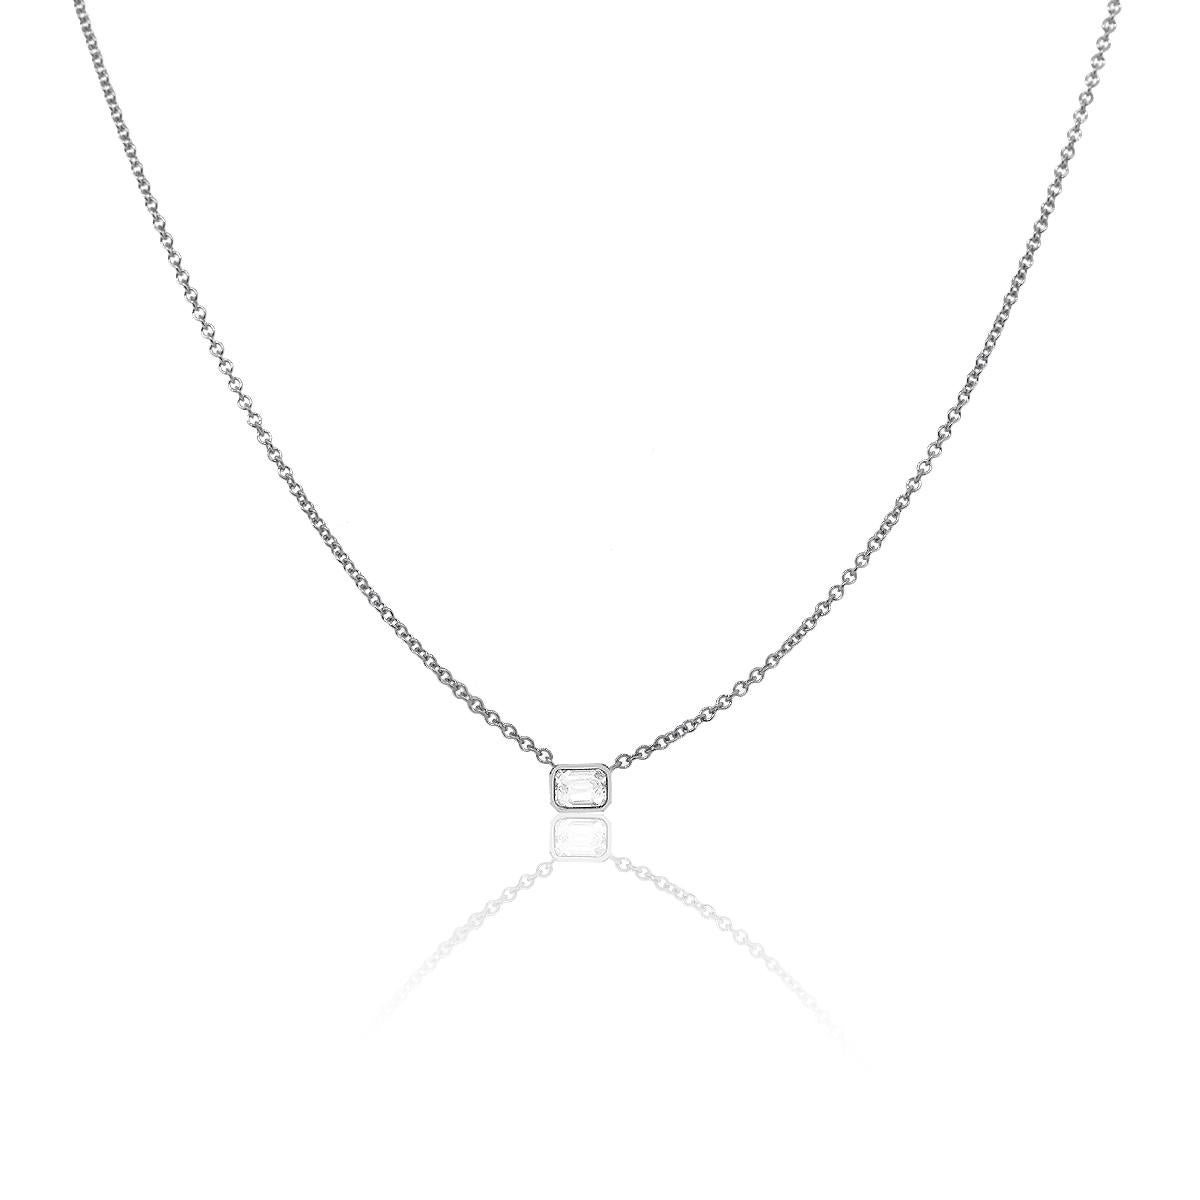 Material: 18k white gold
Measurements: 18″ in length with shortening ring at 16